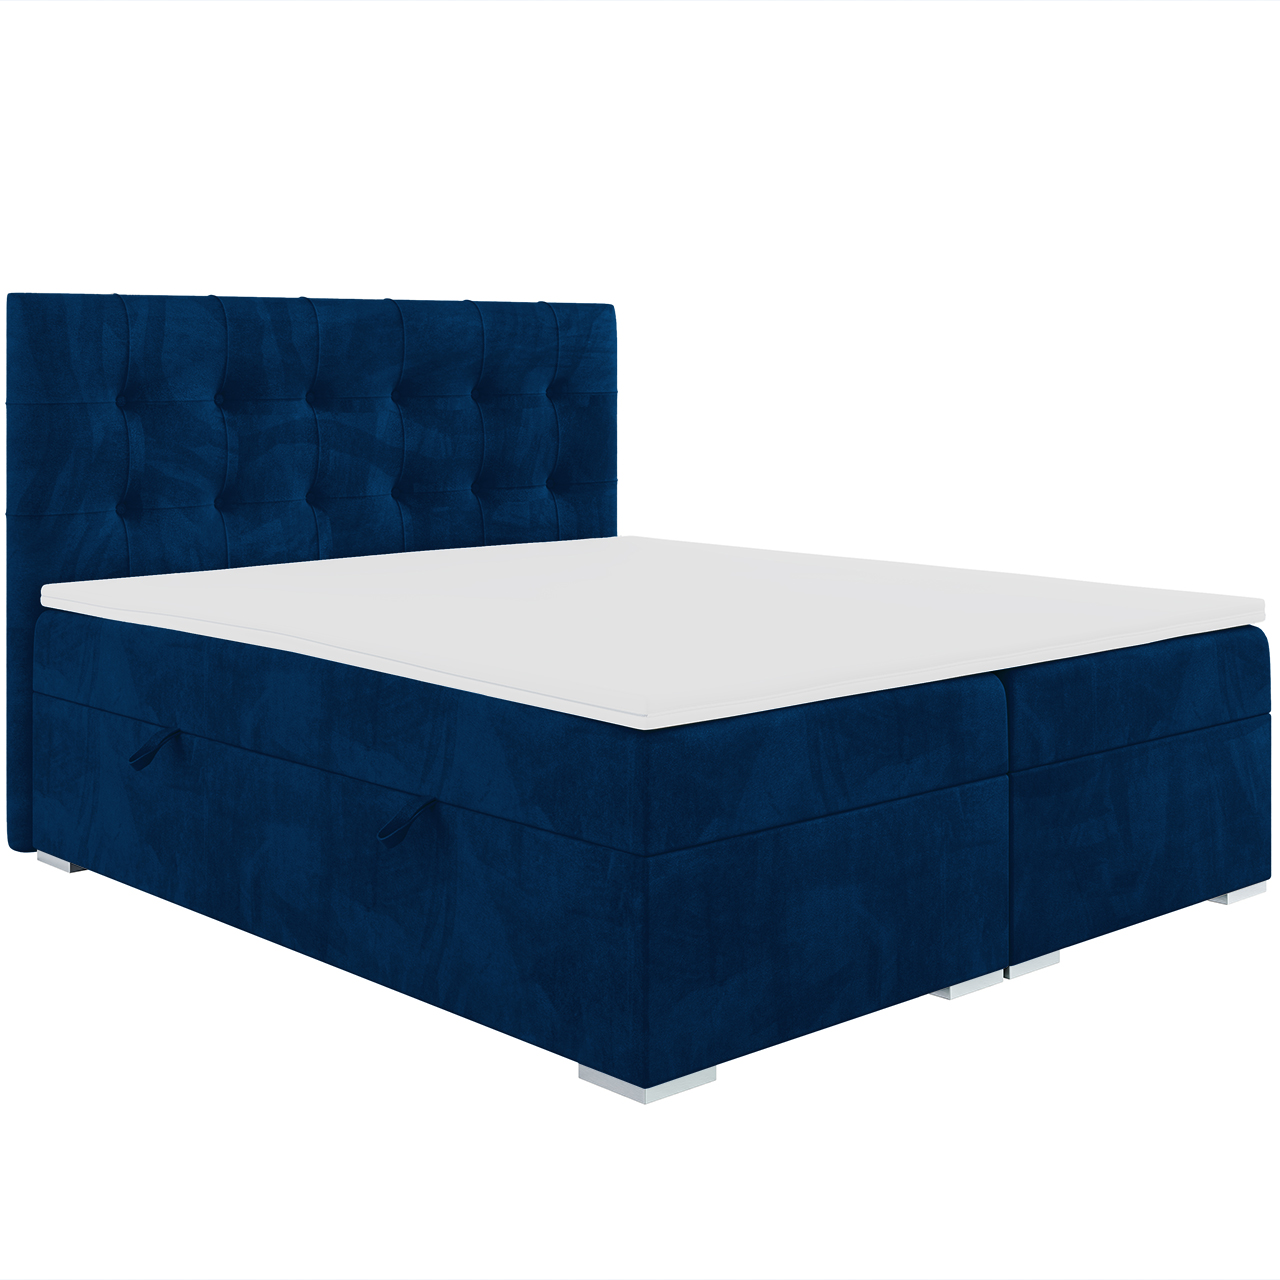 Upholstered bed CARLO 180x200 riviera 81